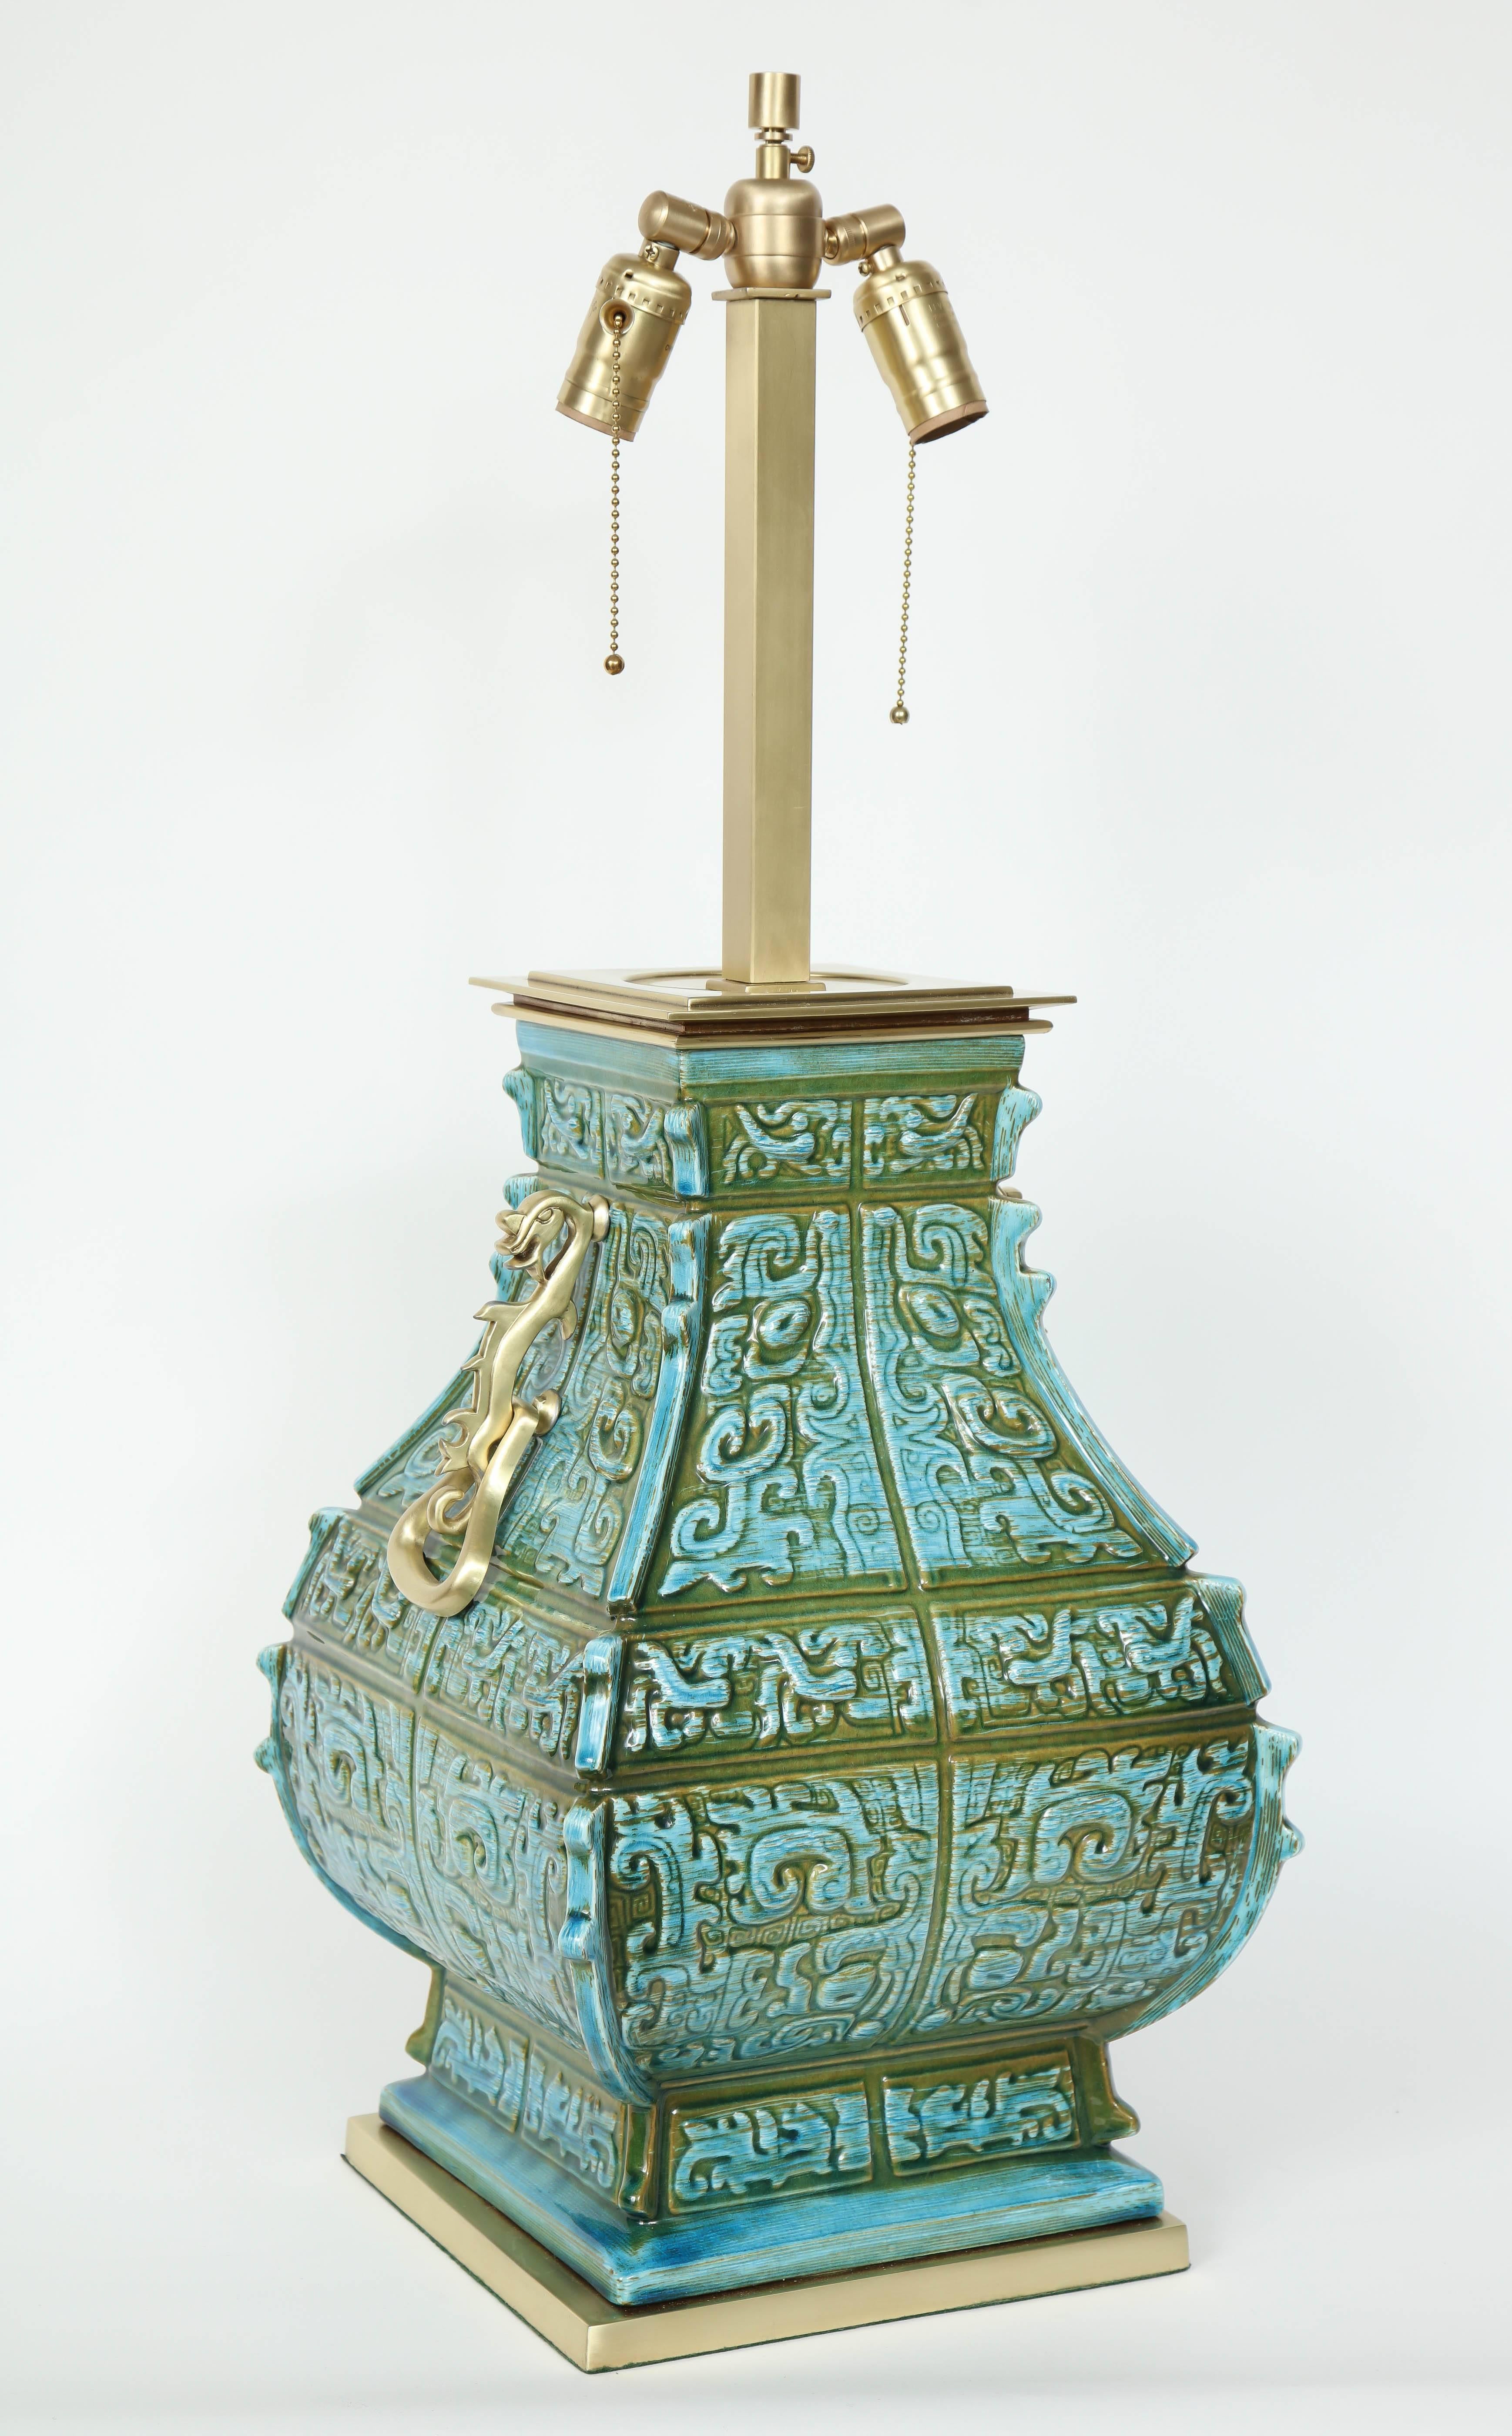 Fantastic pair of Tony Duquette inspired porcelain lamps in muted colors of moss green and sky blue glaze with satin brass door knocker accents on sides while sitting on satin finished brass bases. Lamps have been rewired for use in the USA.